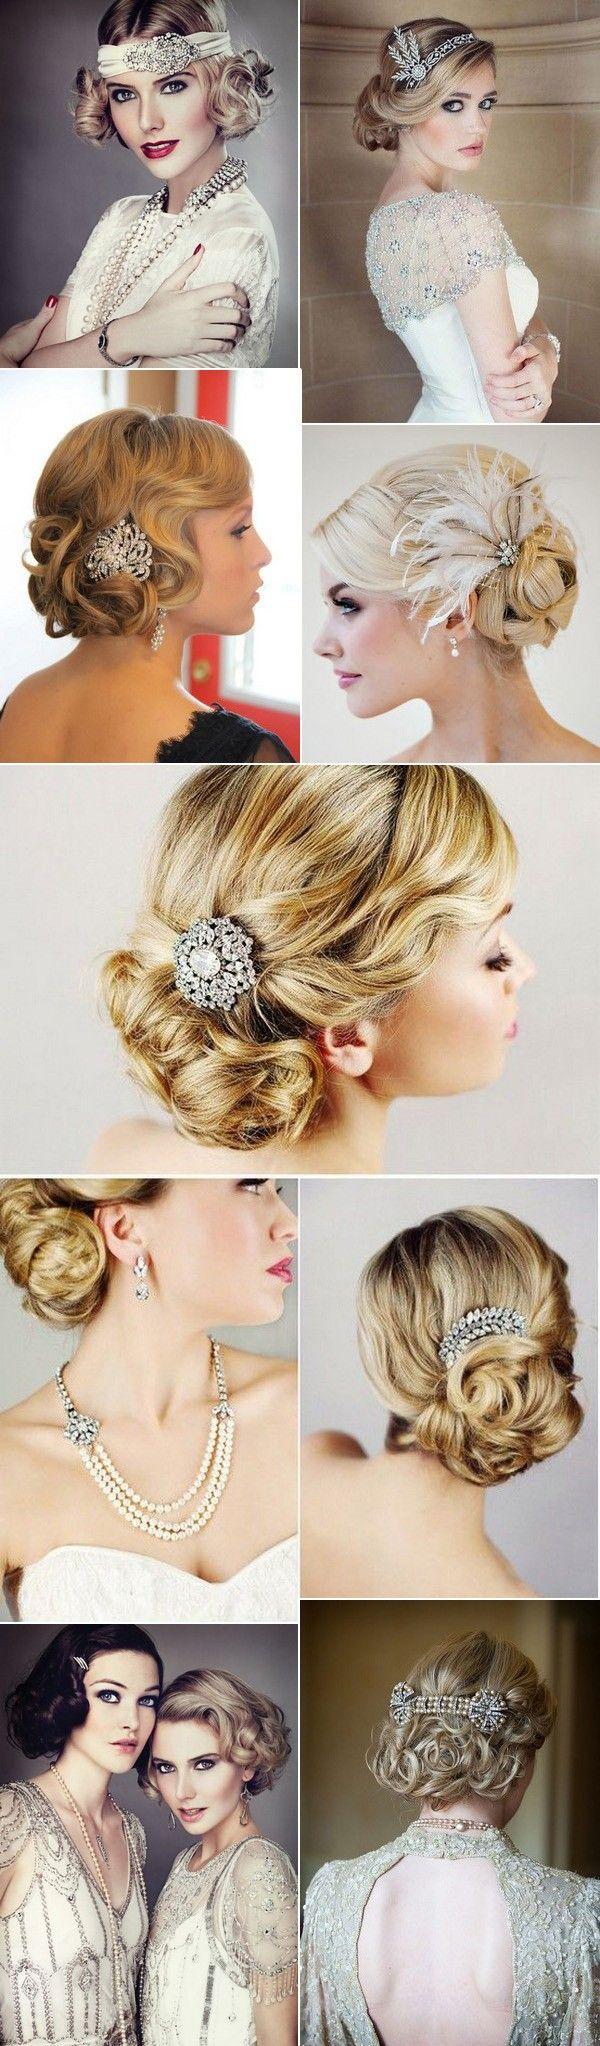 Wedding - 30 Great Gatsby Vintage Wedding Ideas For 2018 Trends - Page 2 Of 3